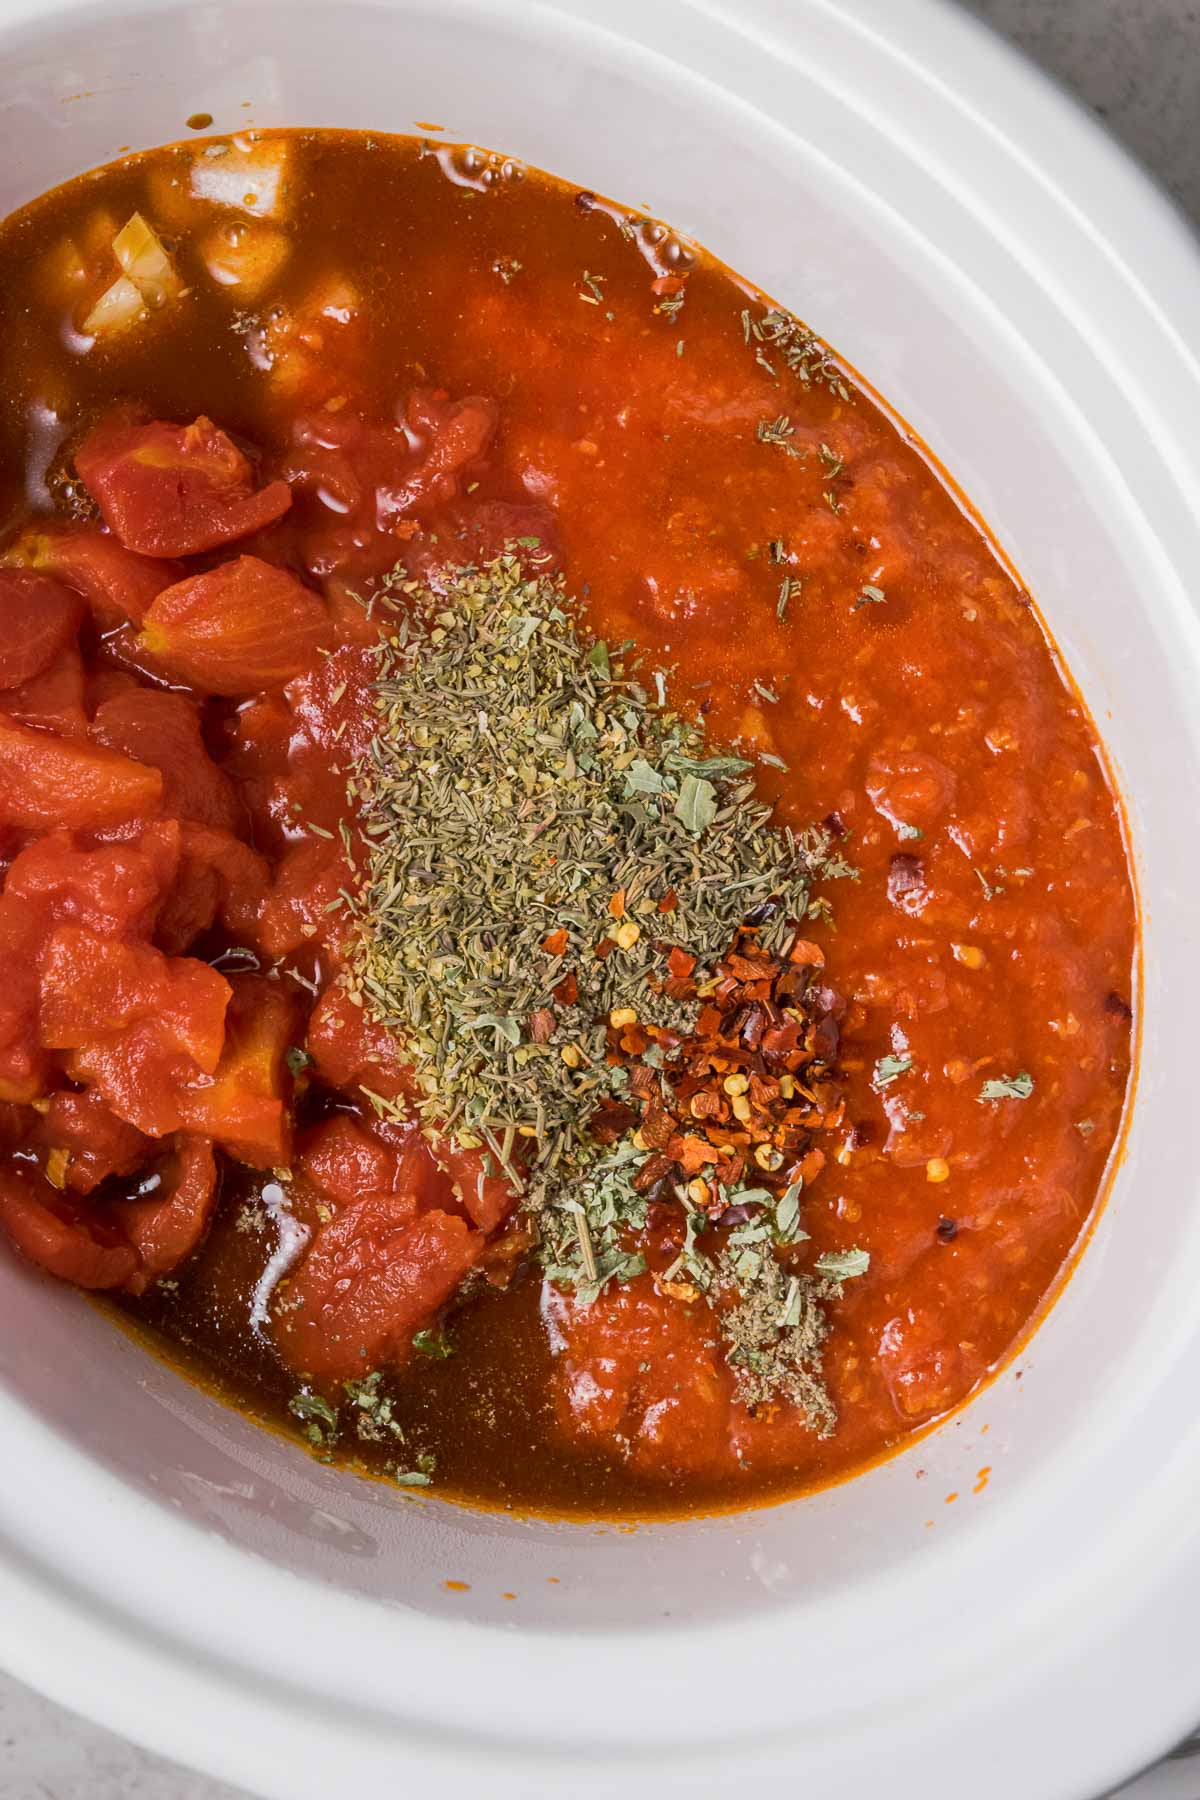 Diced tomatoes herbs and spices are added to the slow cooker goulash.